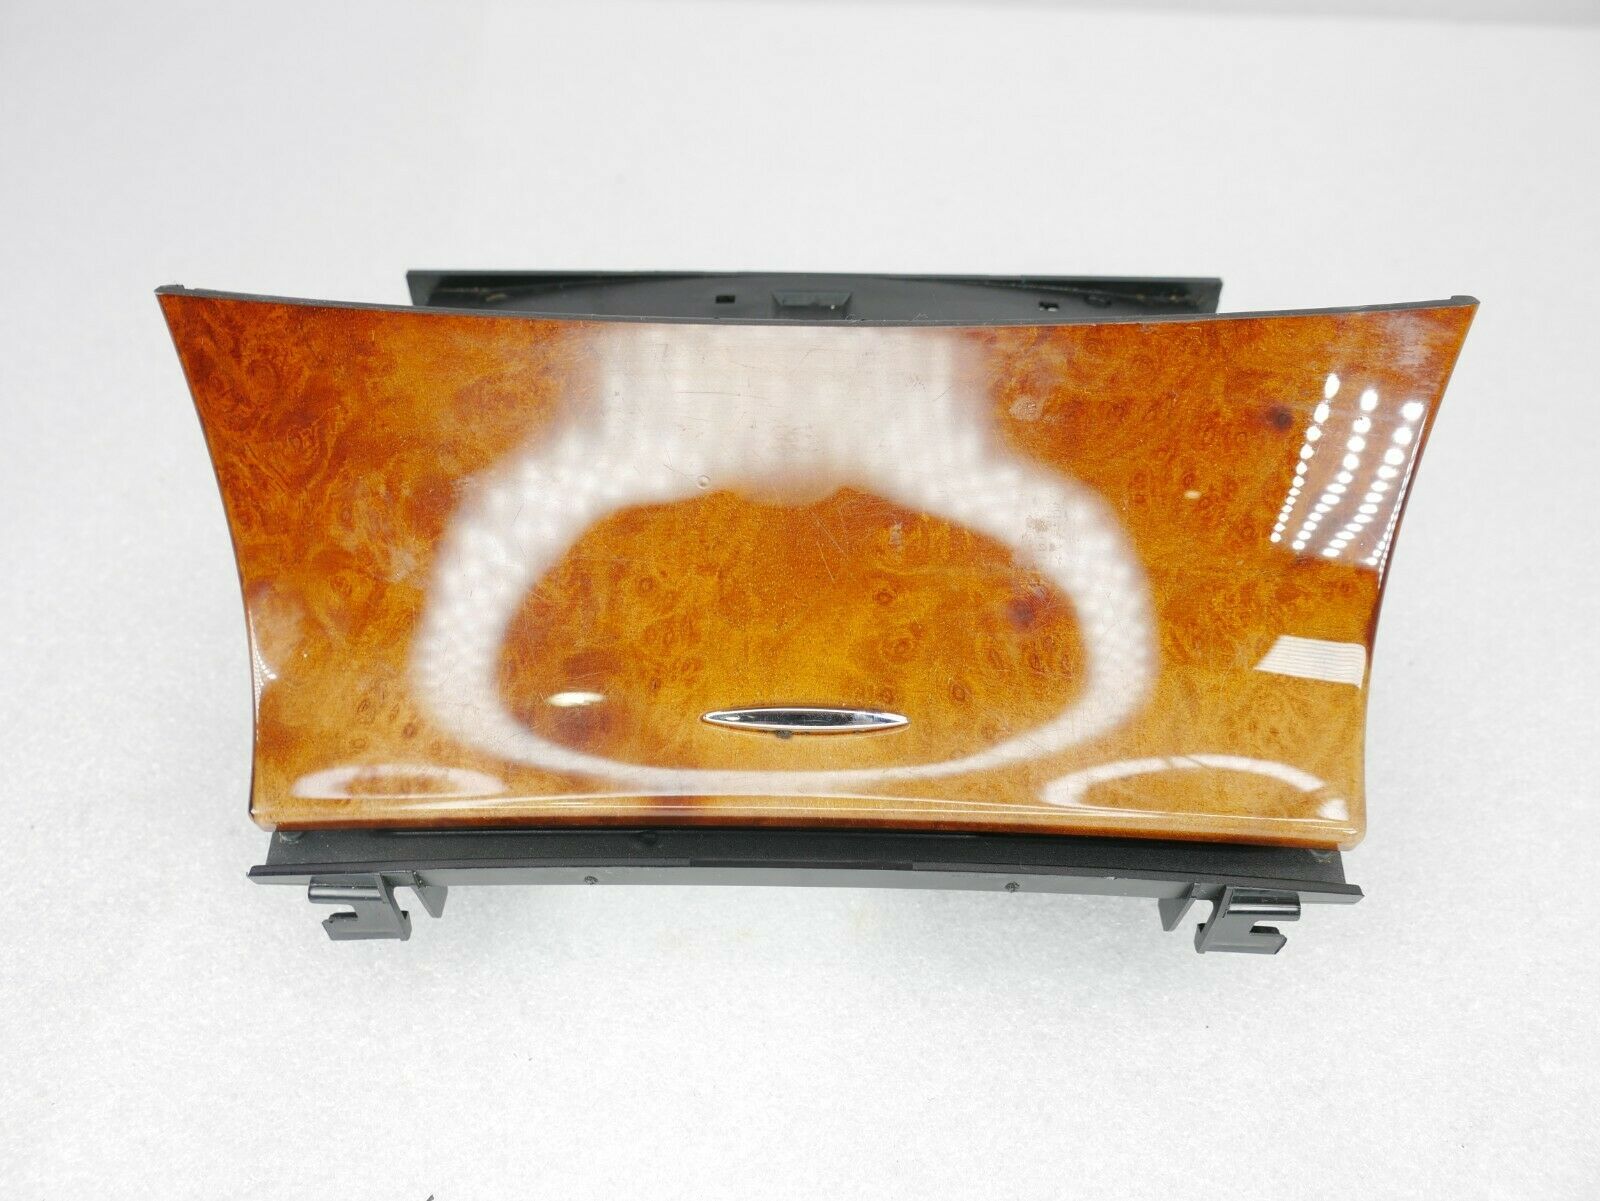 Primary image for 03-09 MERCEDES BENZ W211 E CLASS CENTER STORAGE COMPARTMENT WITH ASH TRAY INSERT